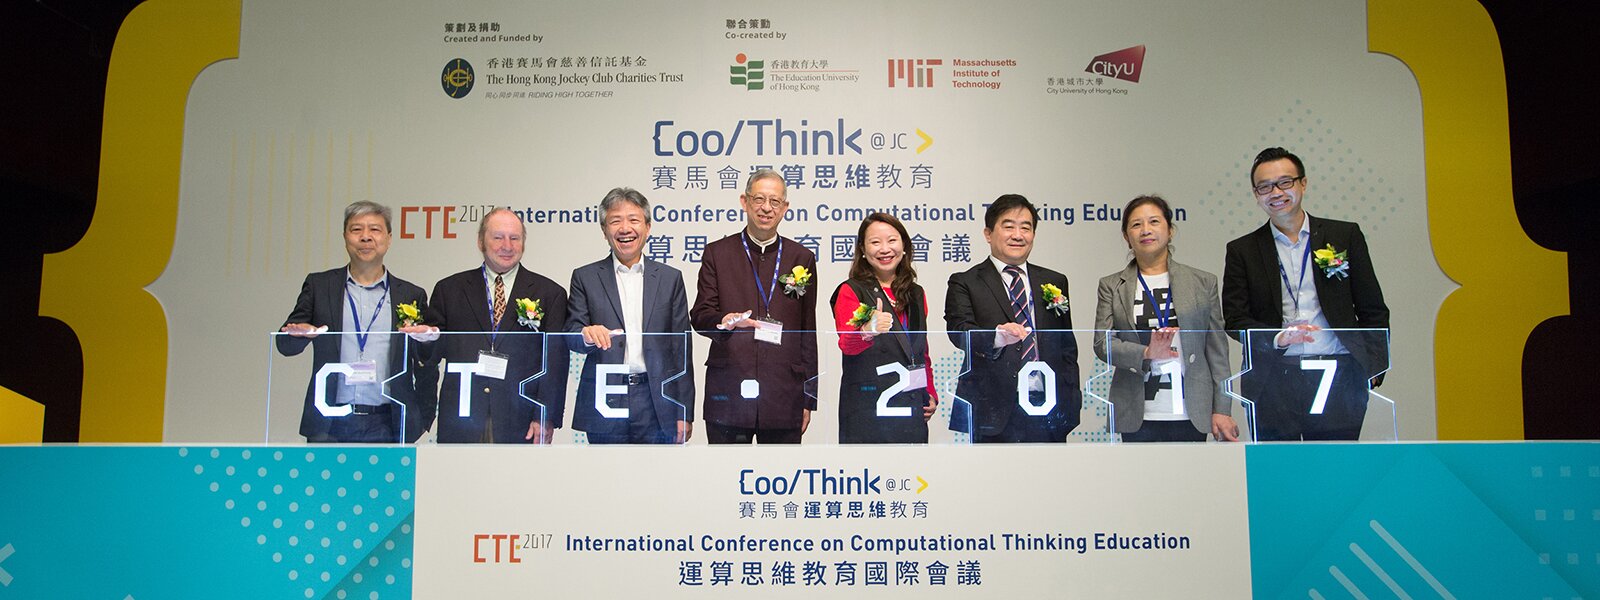 International Conference on Computational Thinking Education 2017 by CoolThink@JC